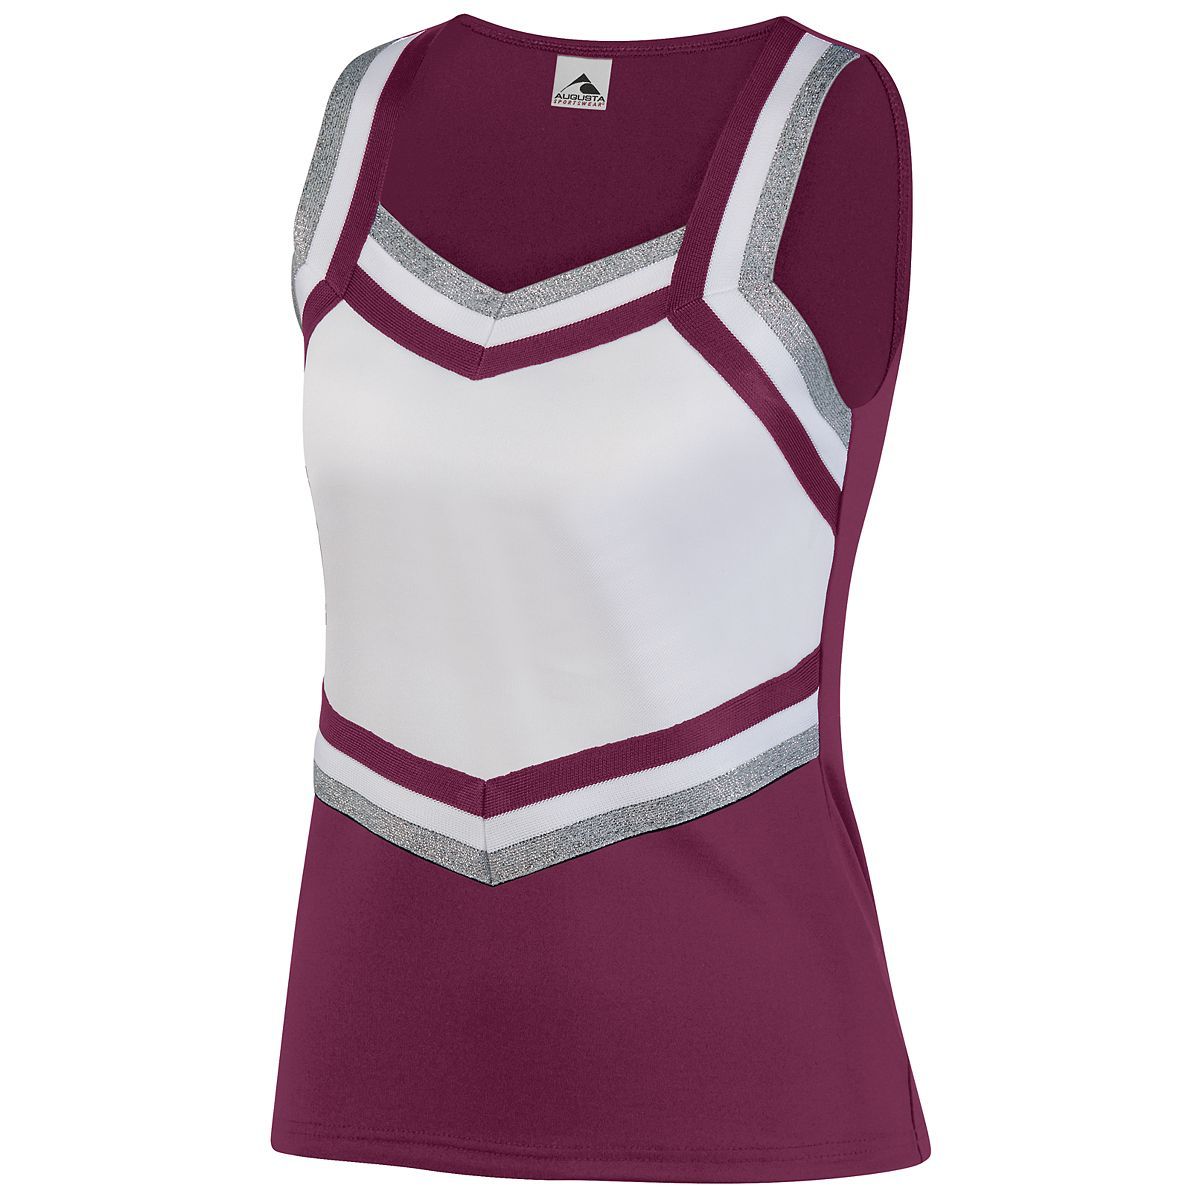 Augusta Sportswear Girls Pike Shell in Maroon/White/Metallic Silver  -Part of the Girls, Augusta-Products, Cheer, Shirts product lines at KanaleyCreations.com